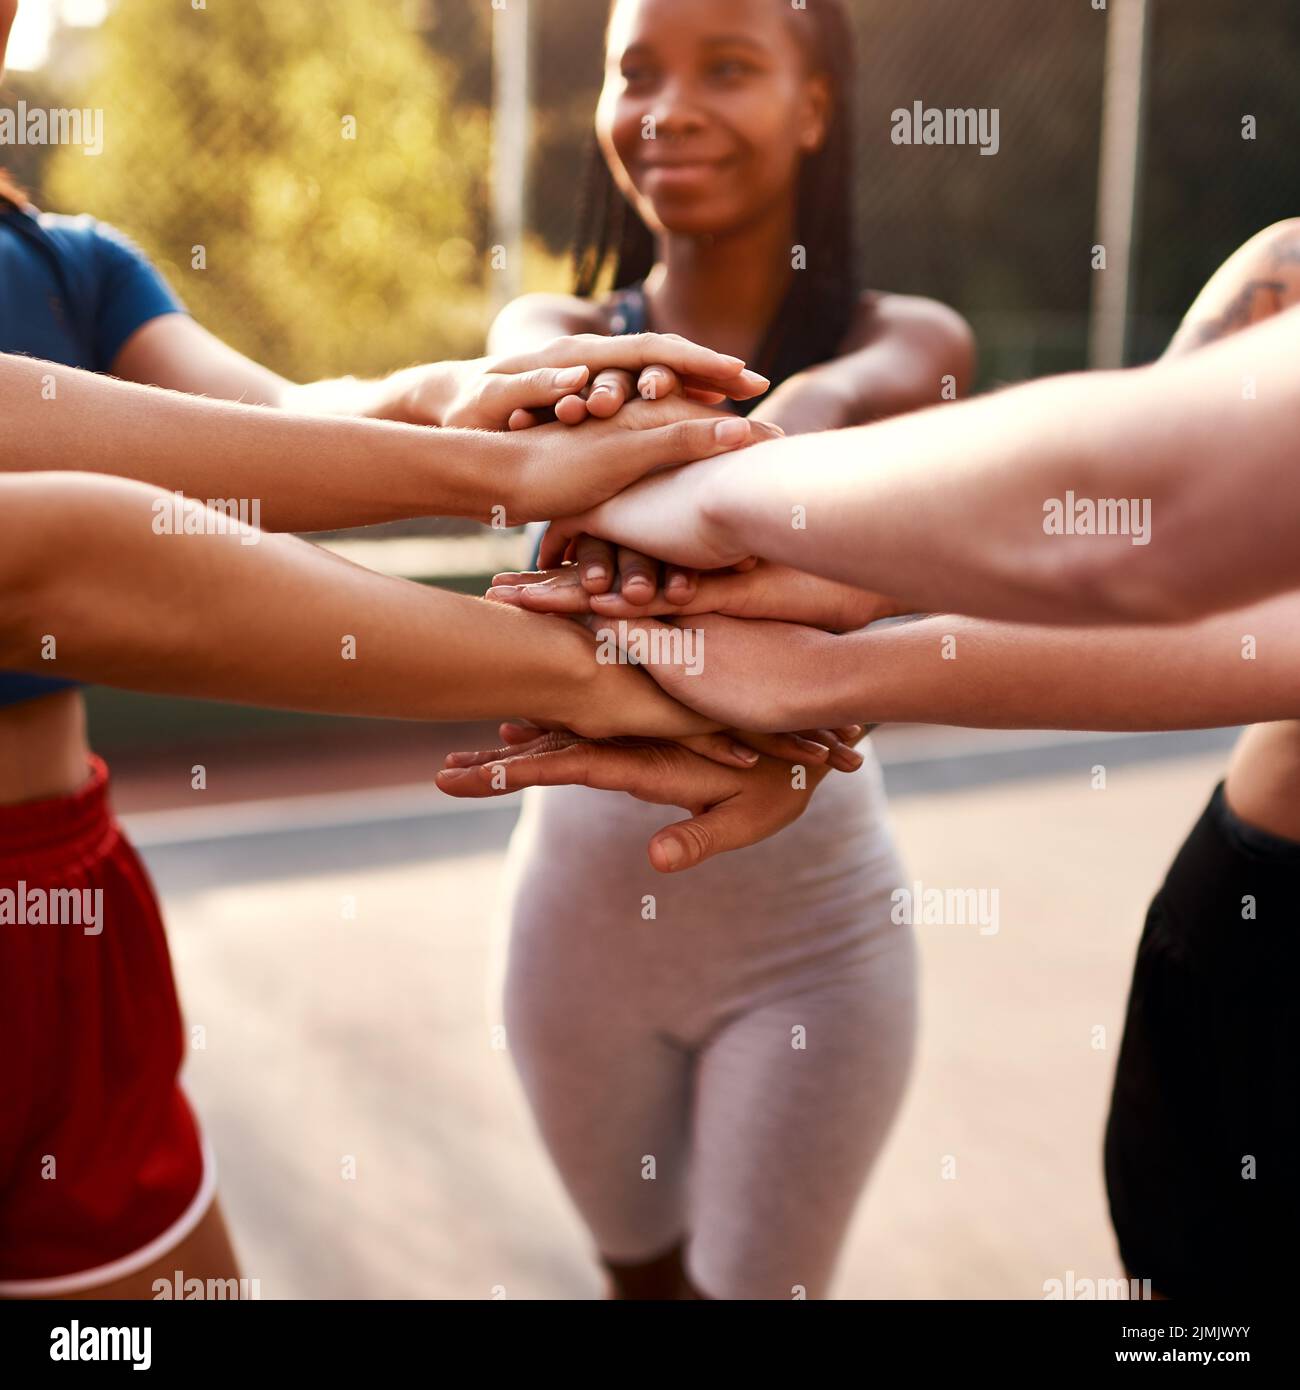 Were ready to win. an unrecognizable group of sportswomen piling their hands together before a basketball game. Stock Photo